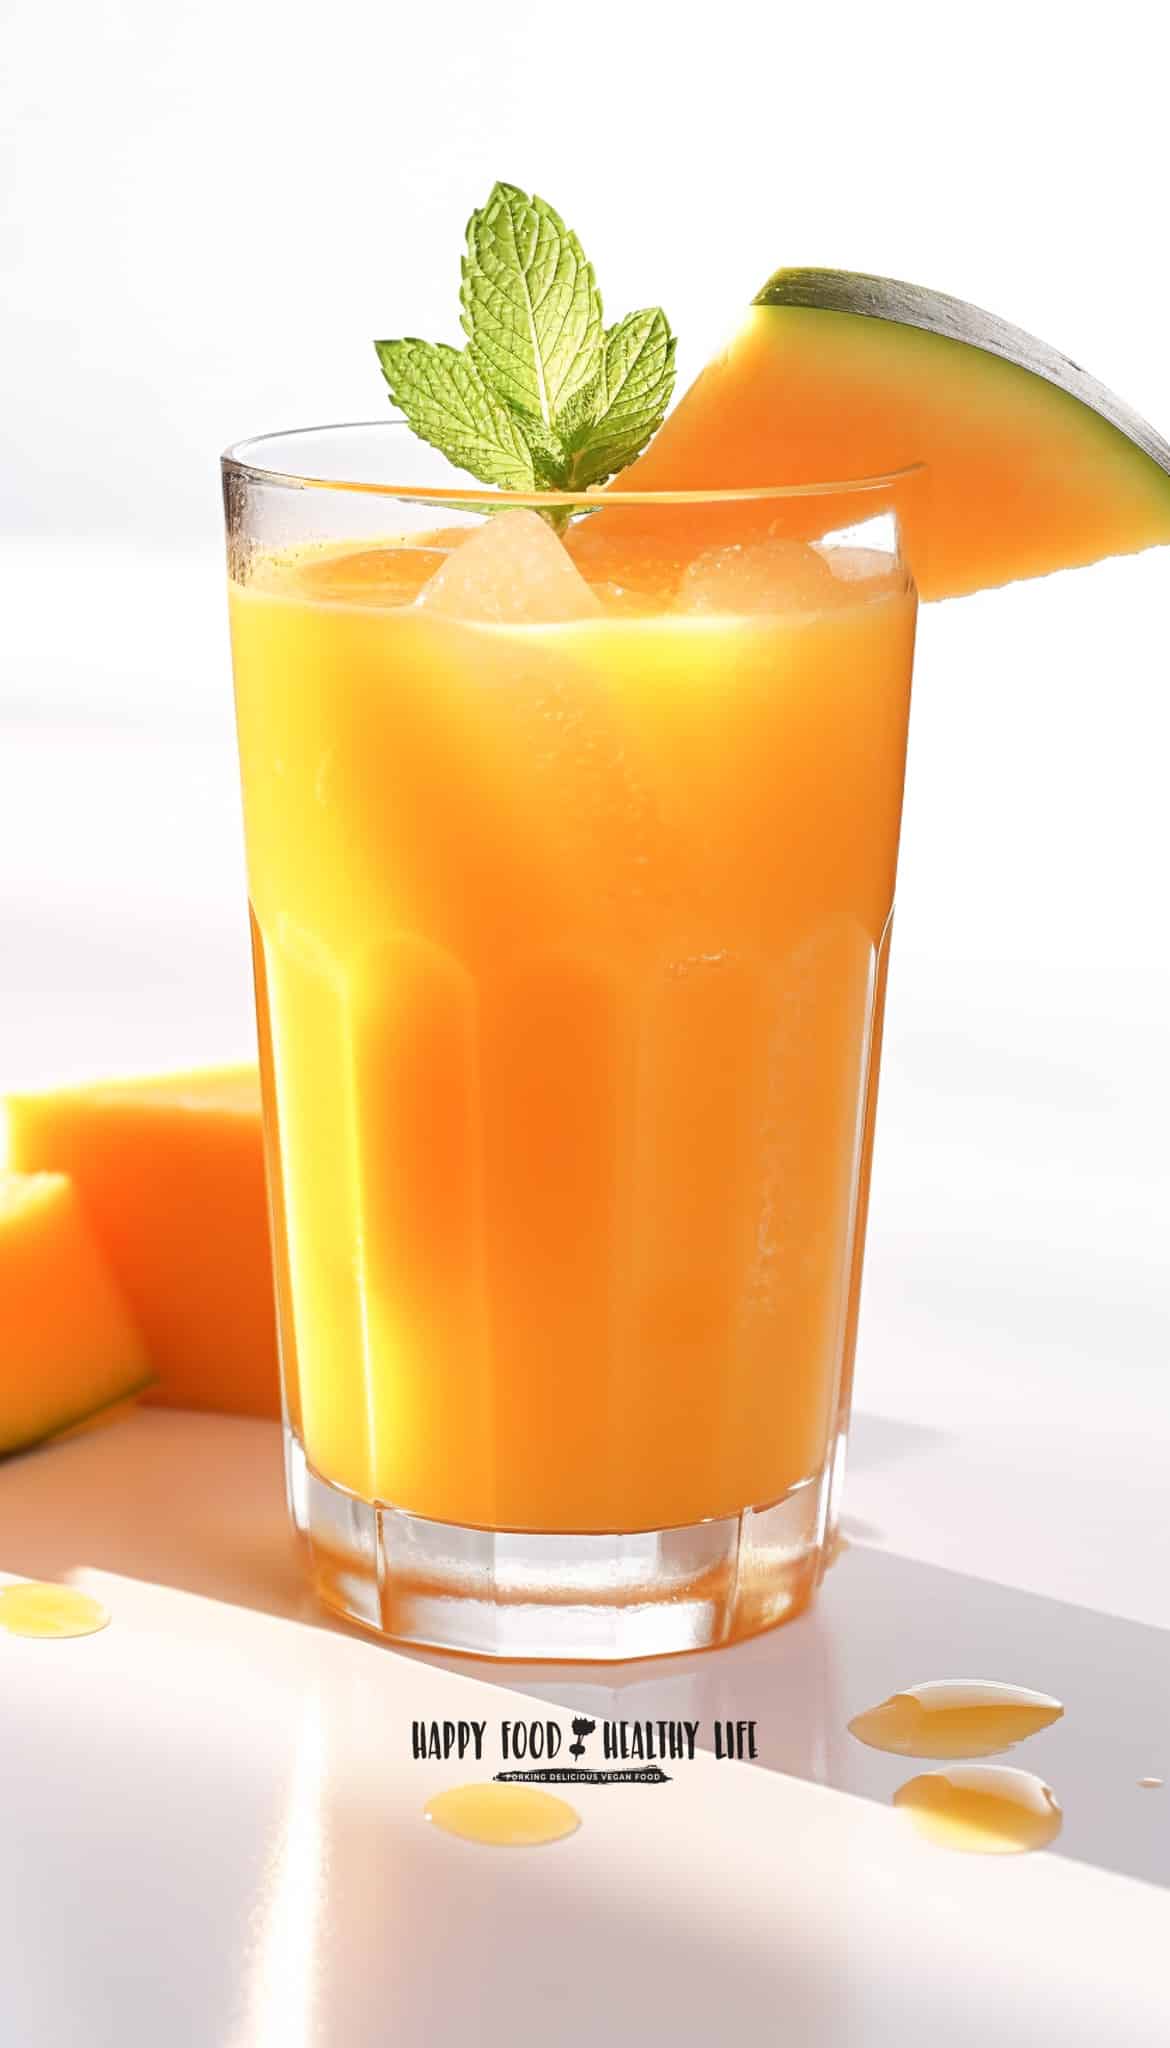 tall clear glass filled with orange liquid on a white background and a white background behind the glass.  A piece of cantaloupe on rim of glass and sprig of mint